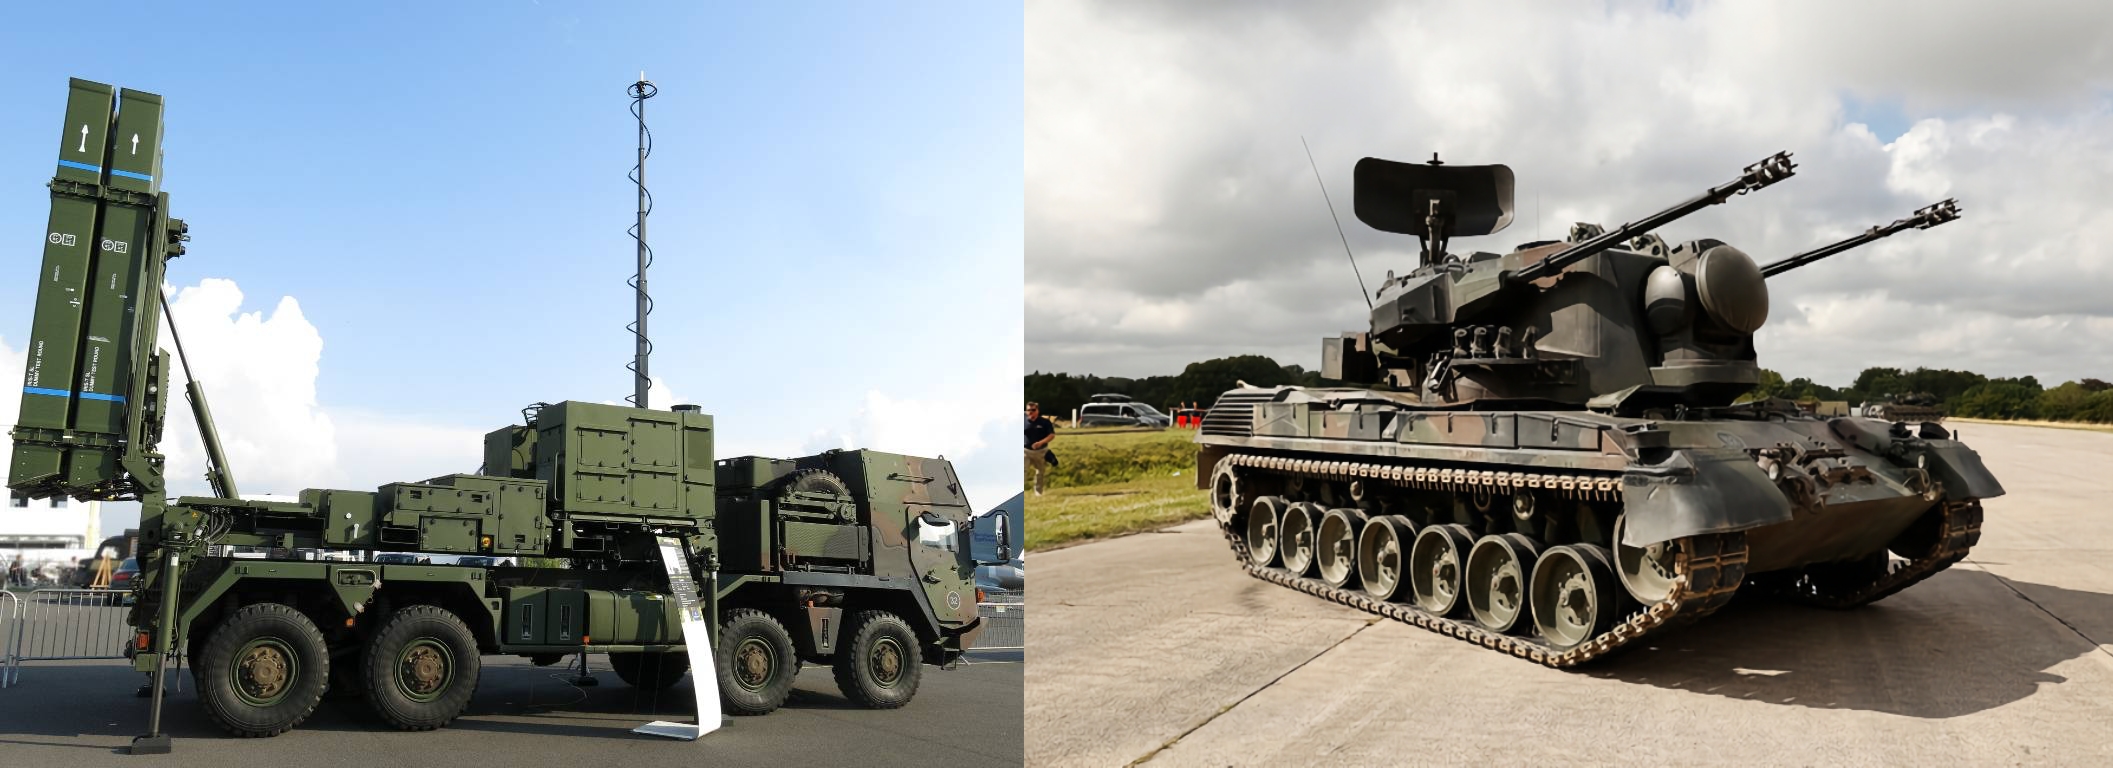 Germany will deliver additional IRIS-T air defence systems and Gepard anti-aircraft tanks to Ukraine soon